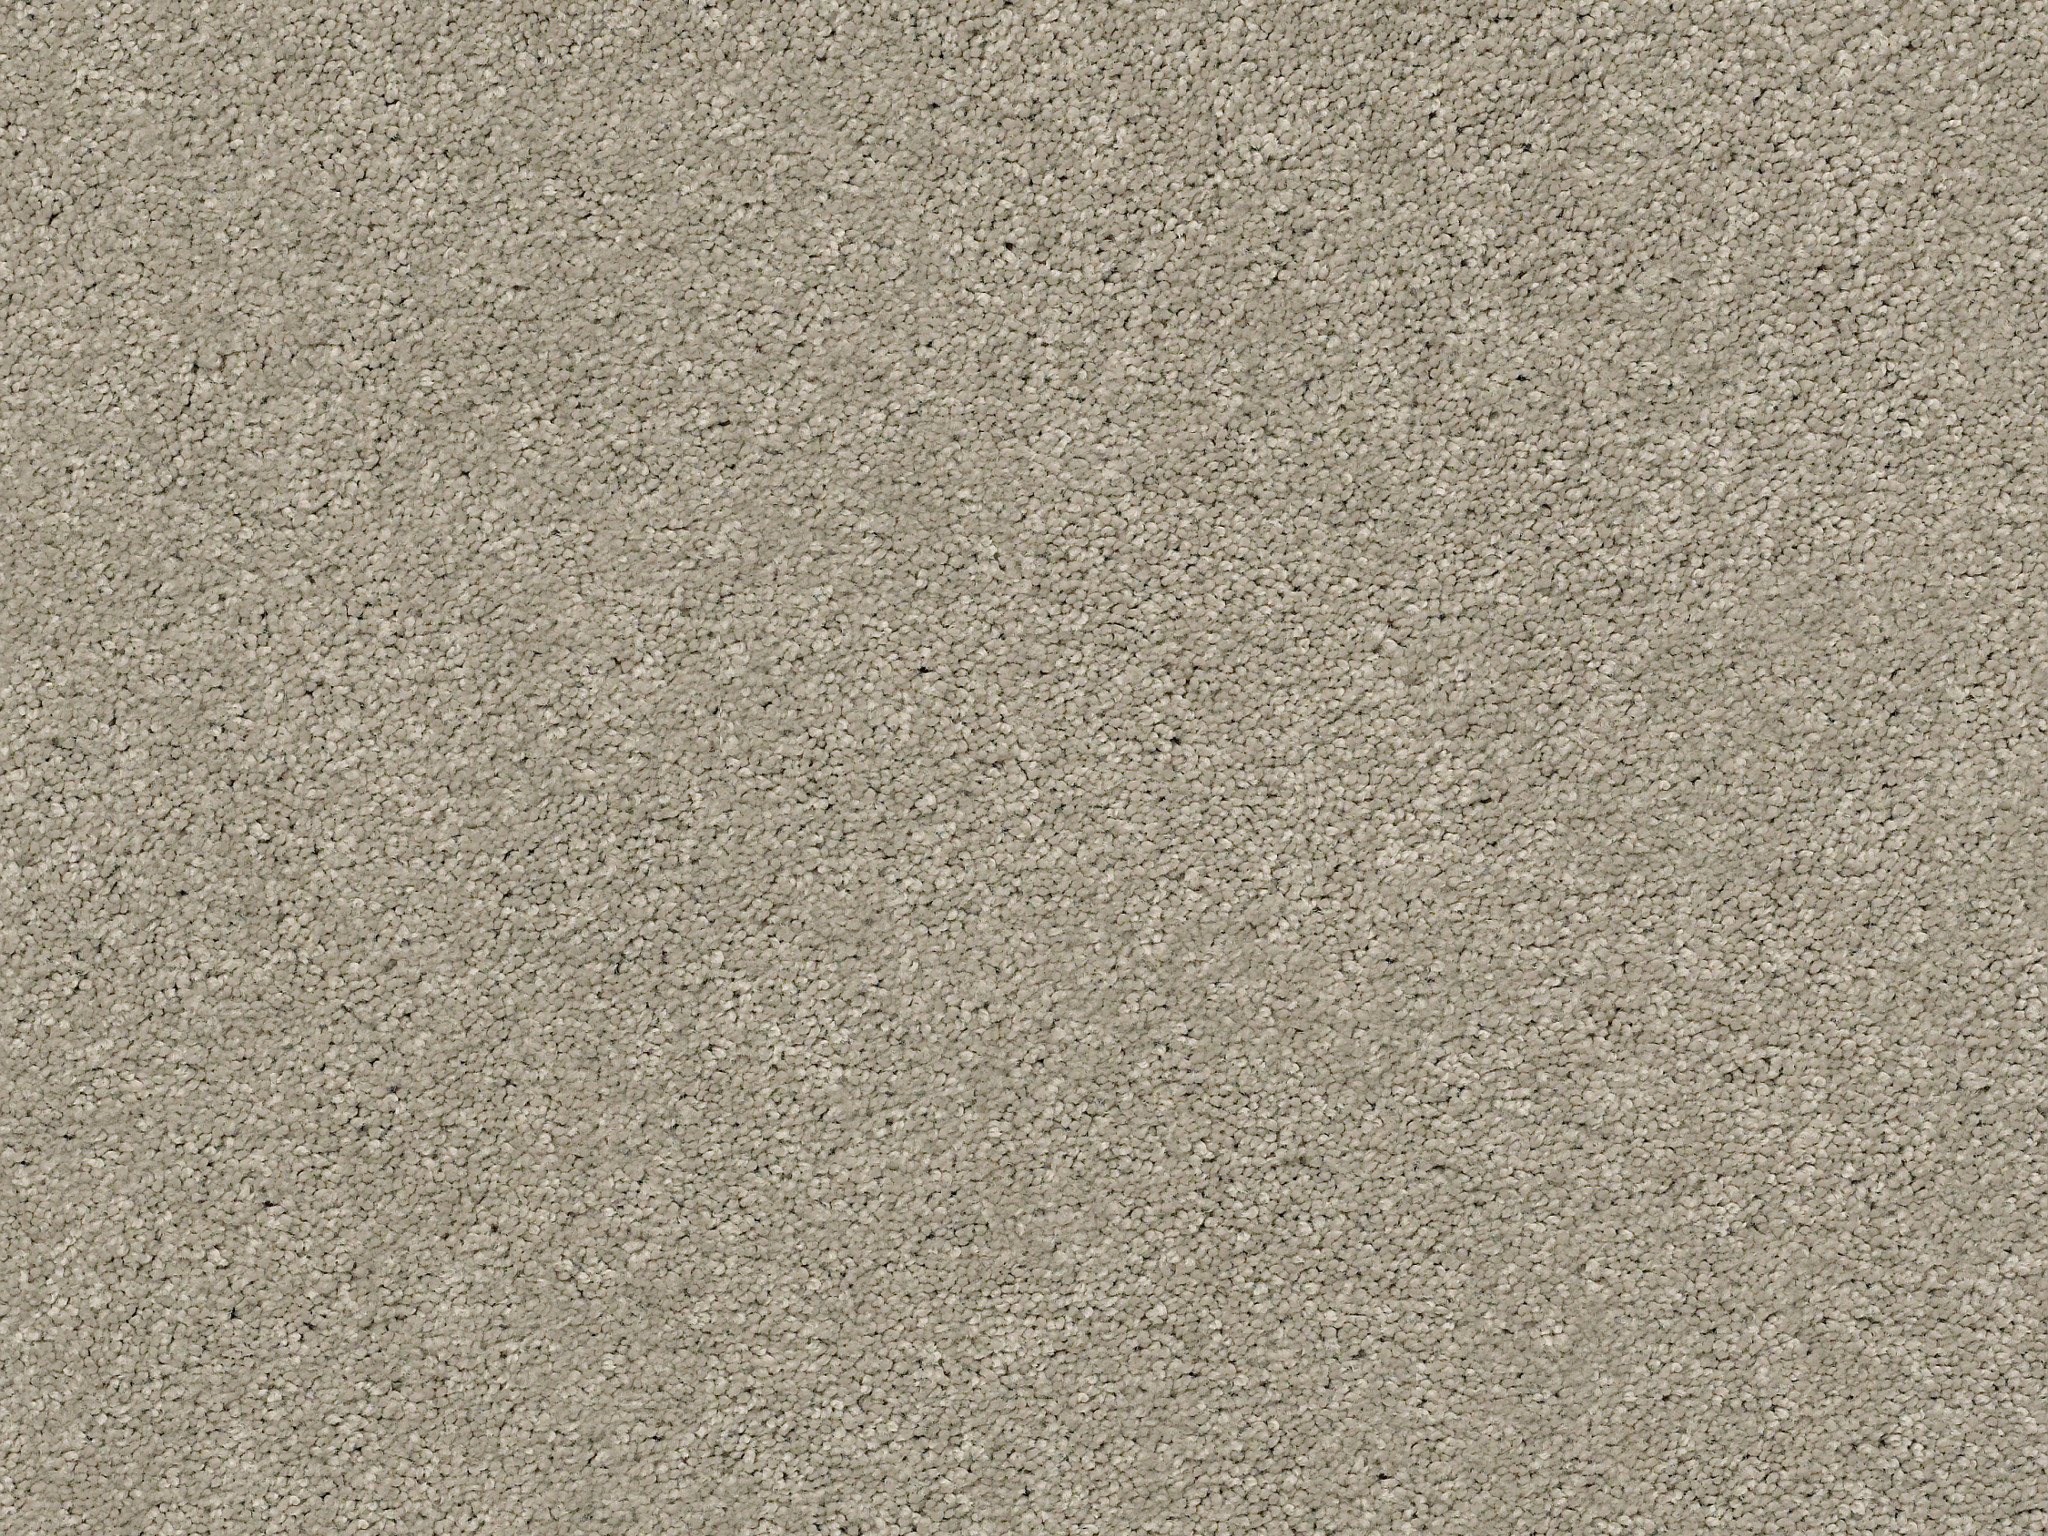 First Act Carpet - Cumulus Zoomed Swatch Image